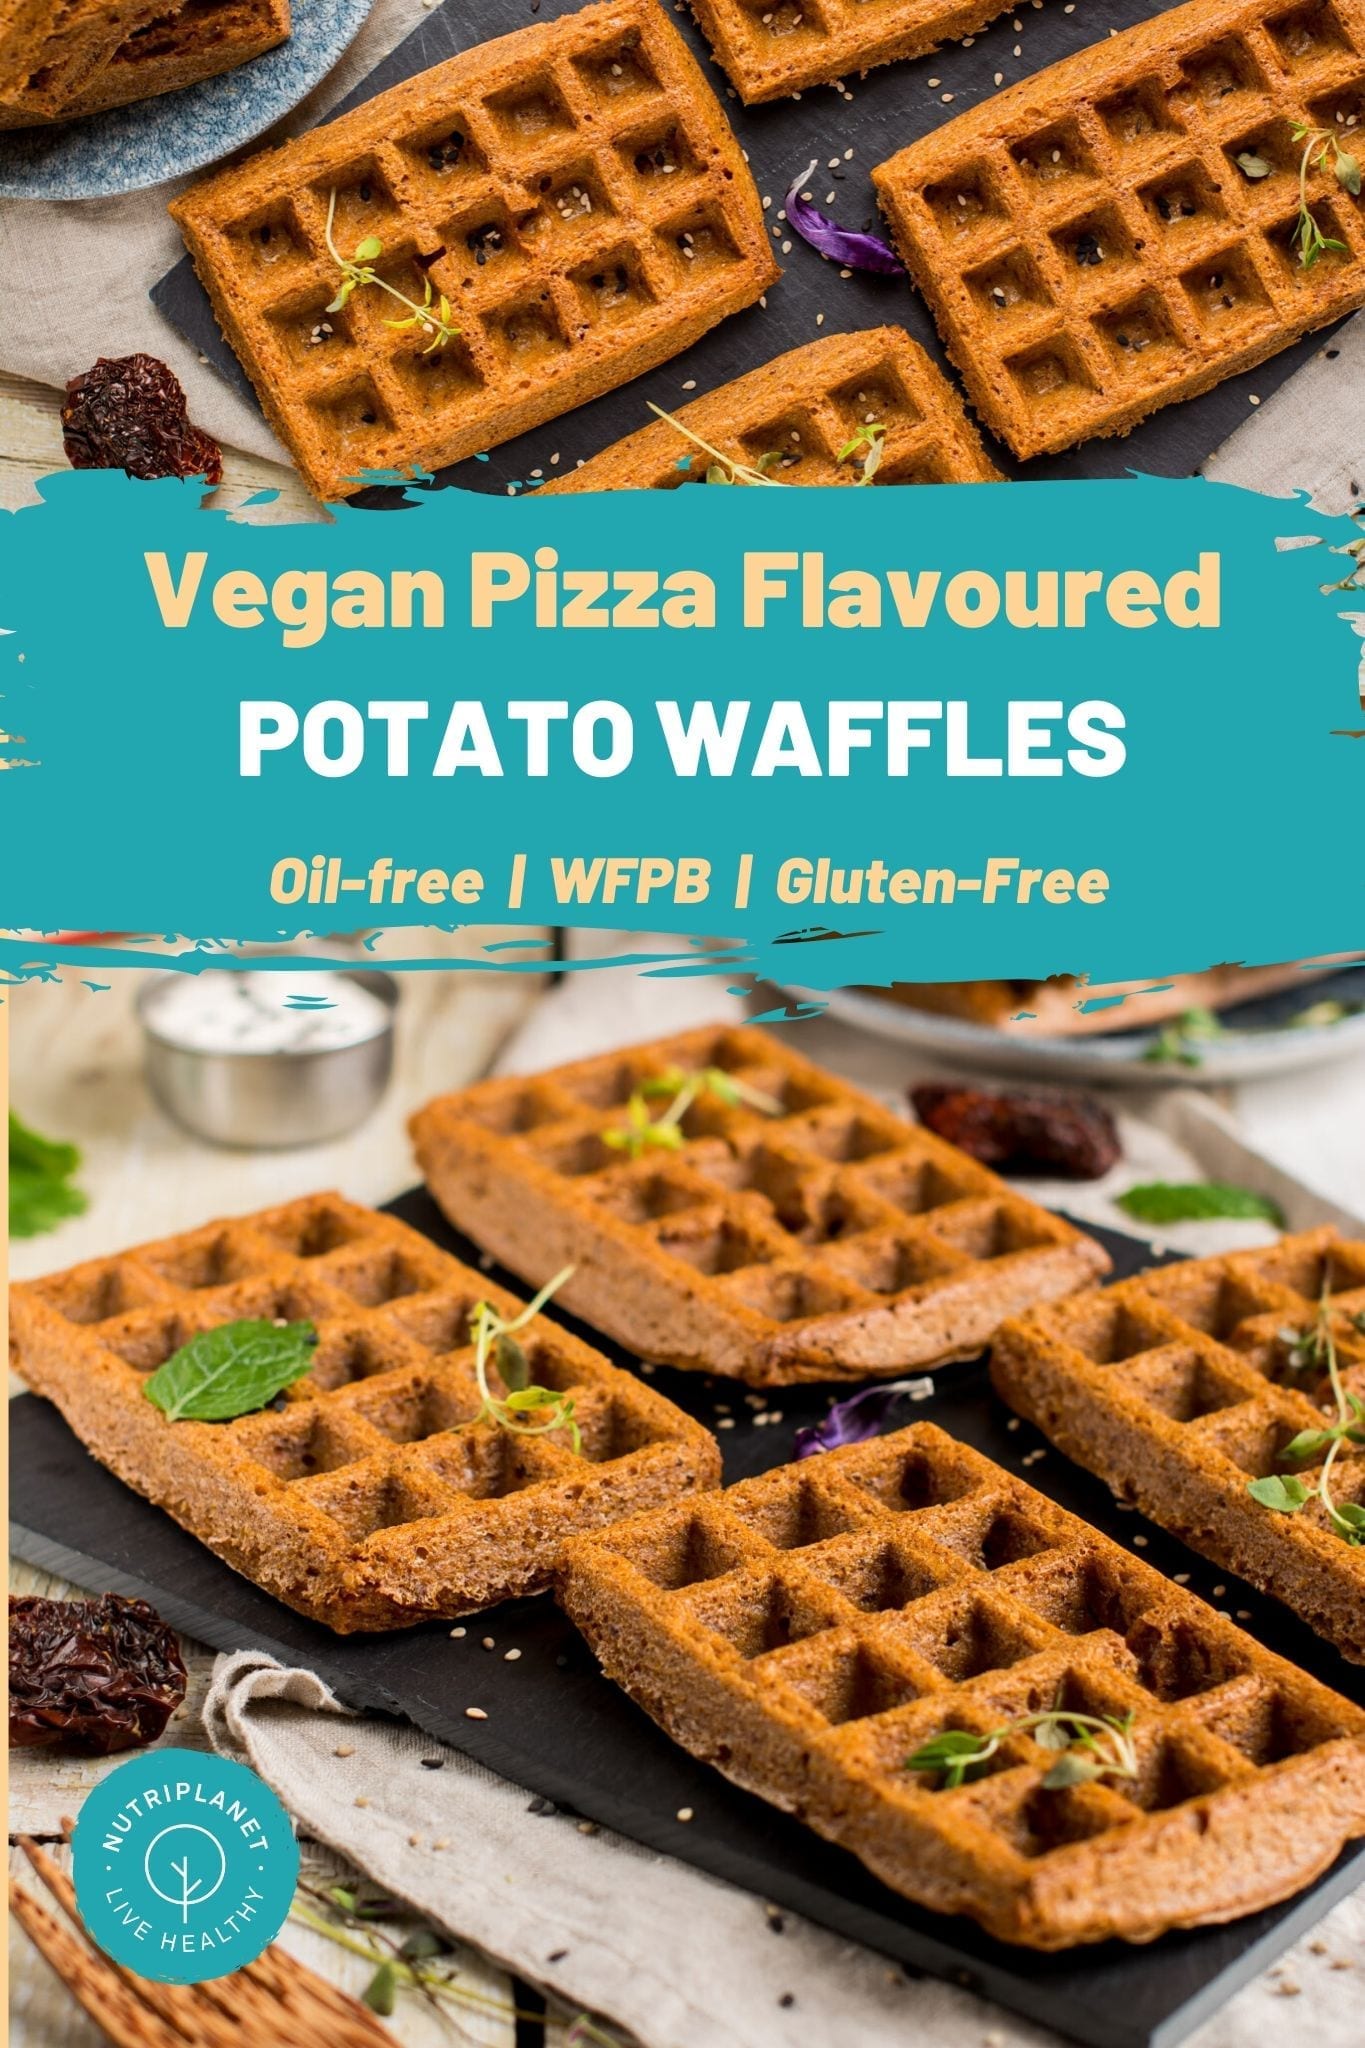 Vegan pizza flavoured gluten-free and oil-free potato waffles that use soaked millet and buckwheat instead of flour.